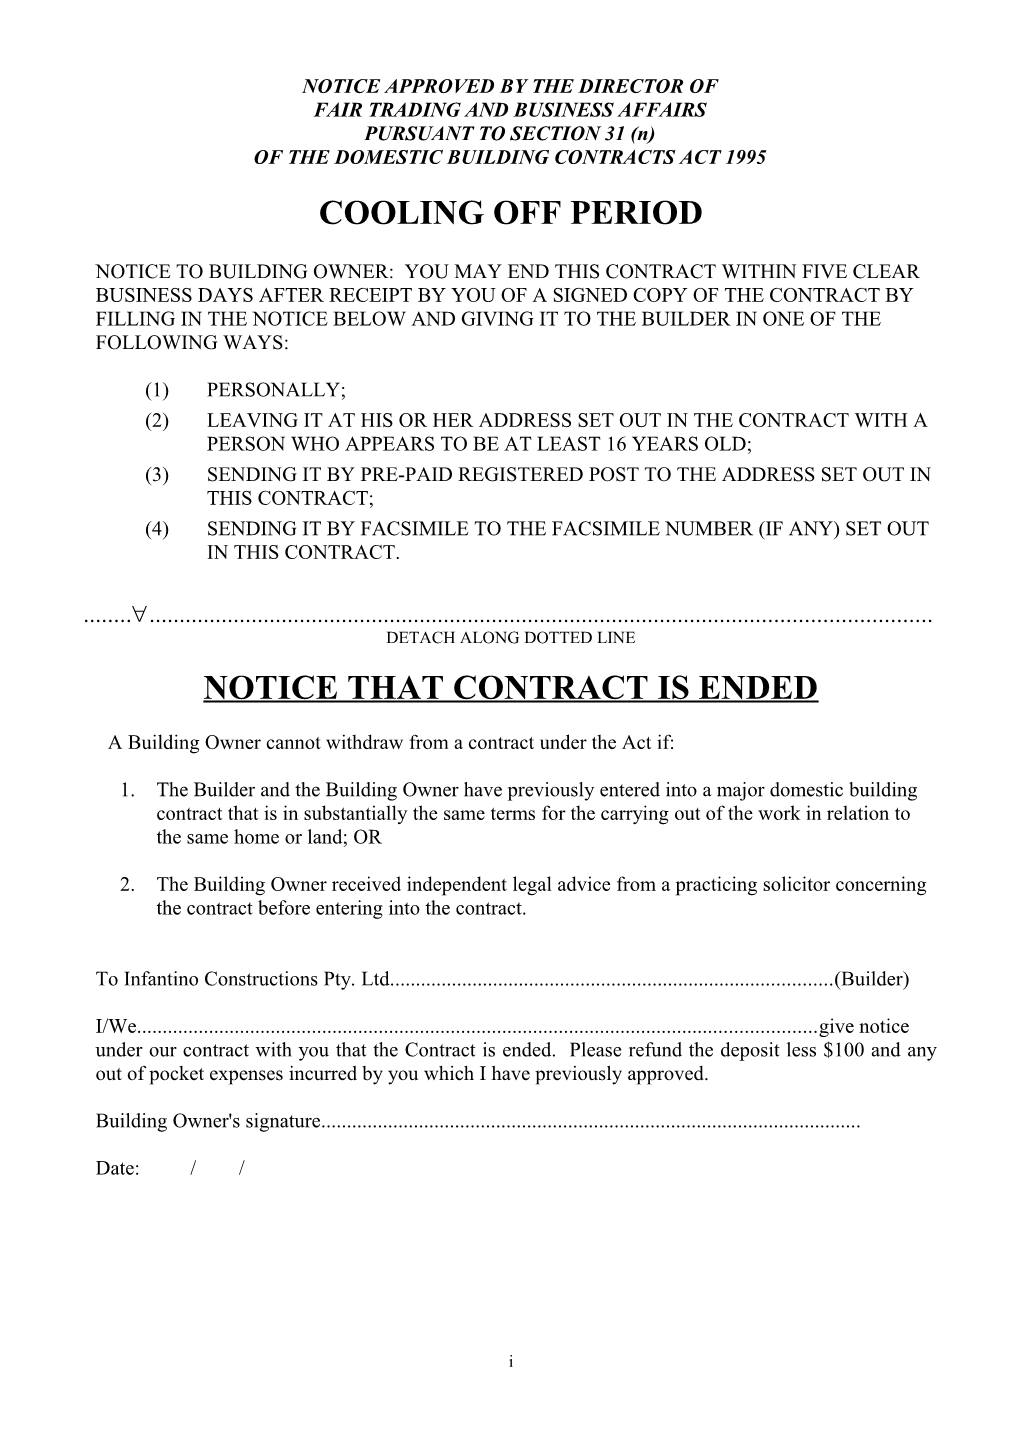 Particulars of Contract